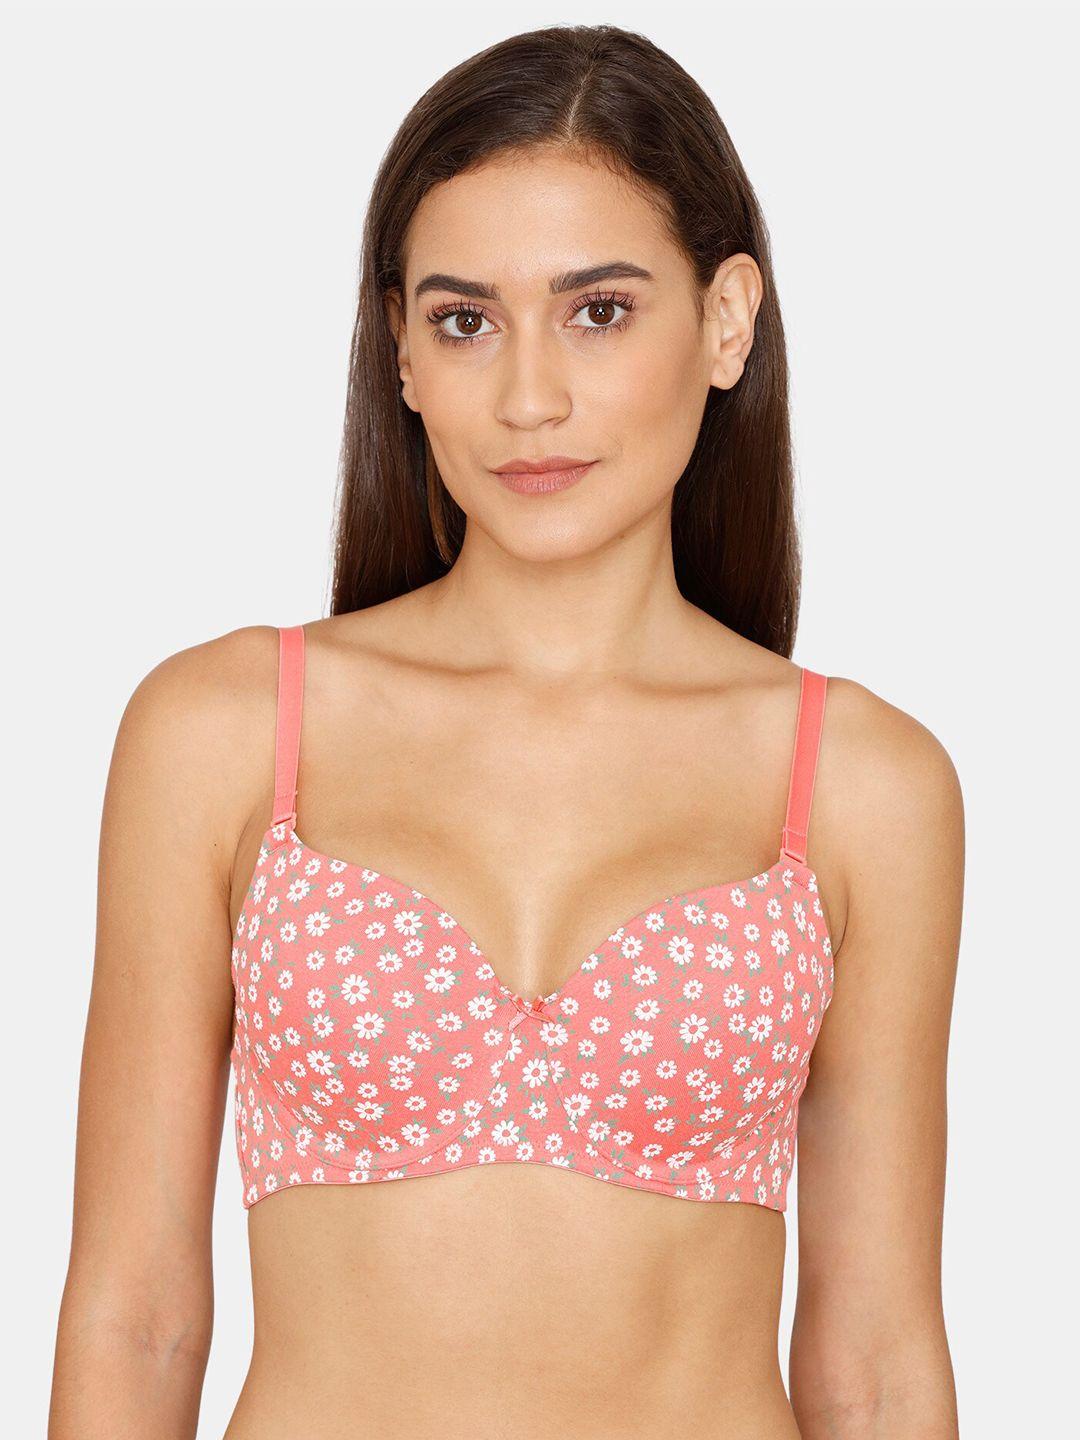 rosaline-by-zivame-peach-coloured-&-white-floral-bra-underwired-lightly-padded